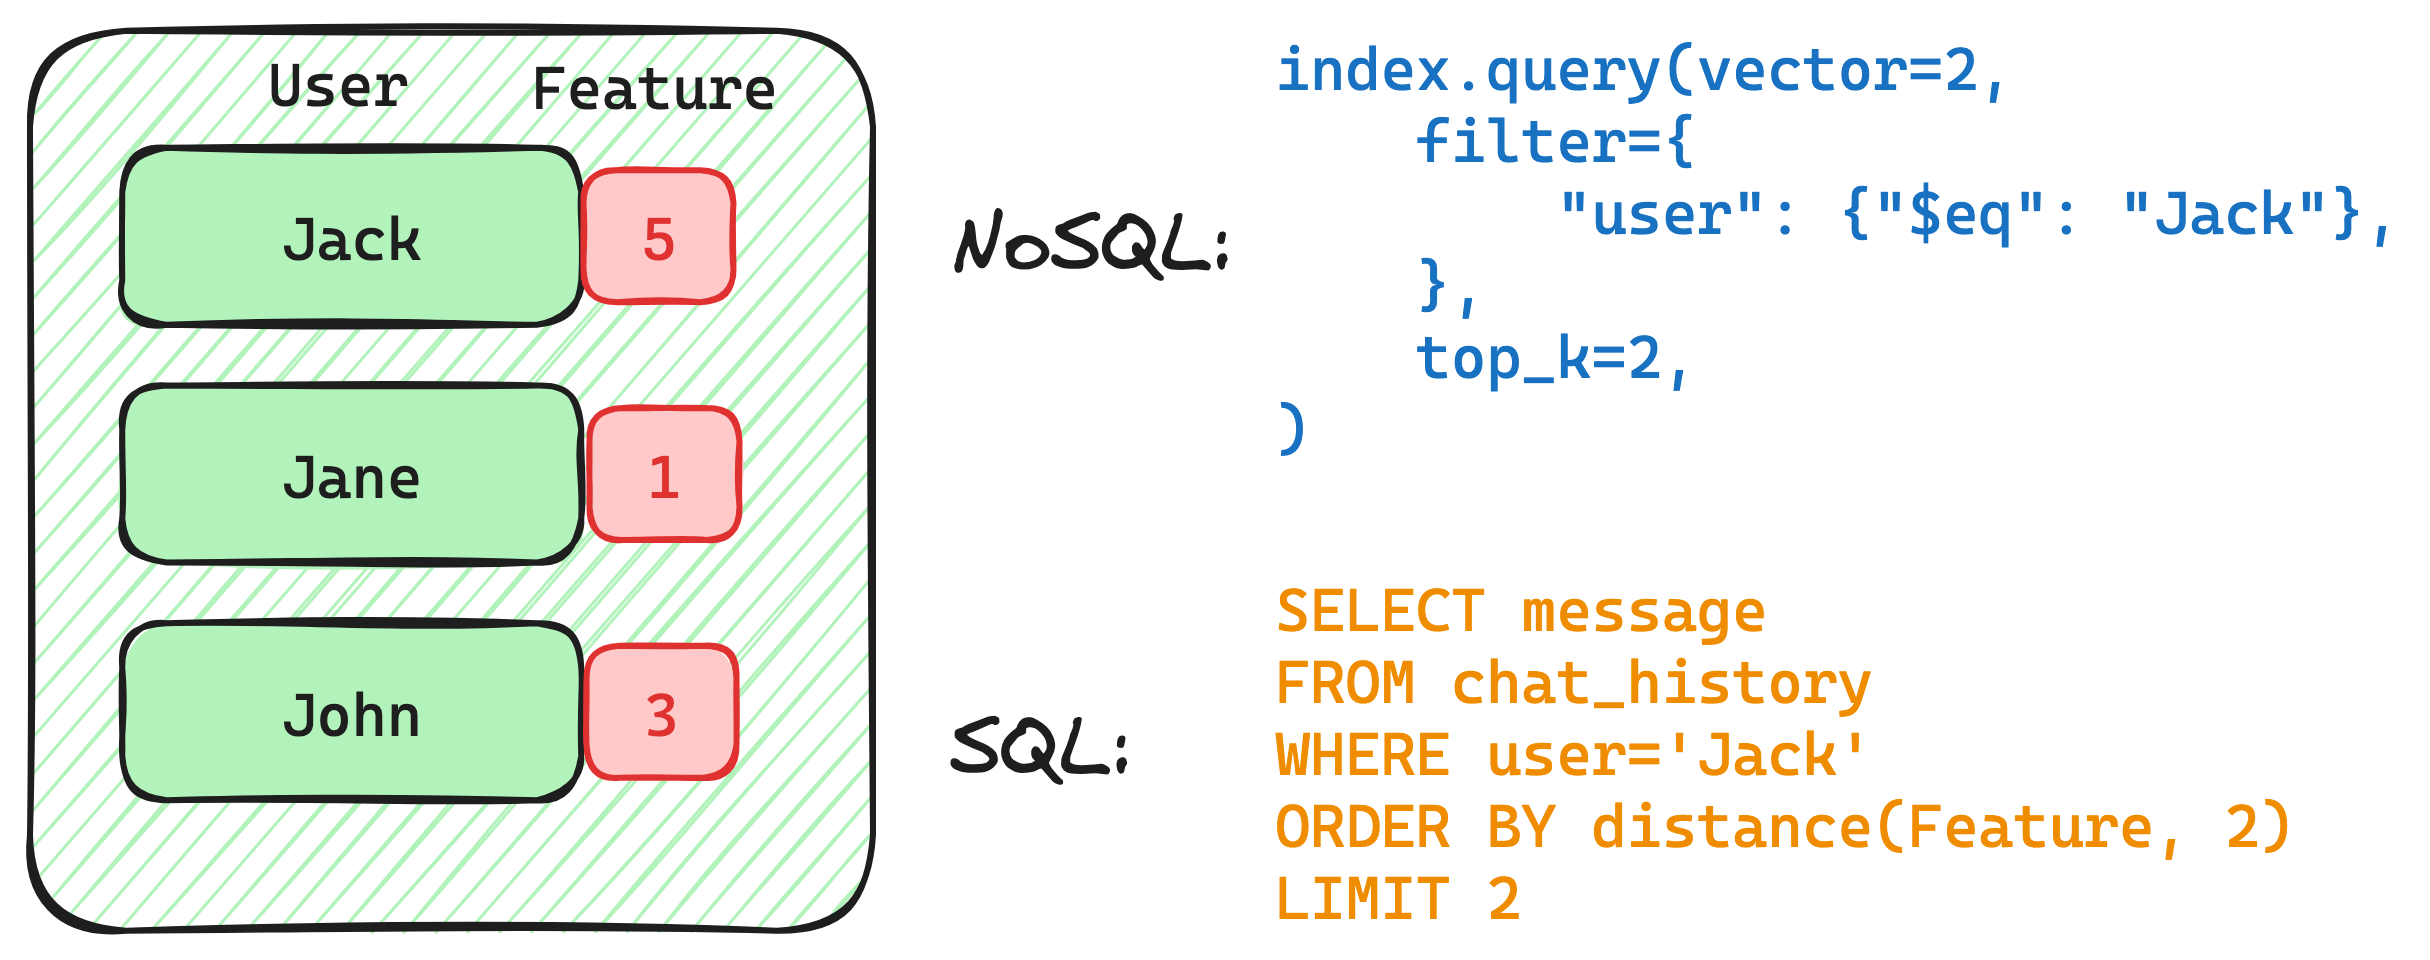  NoSQL and SQL query retrieving Jack’s chat history